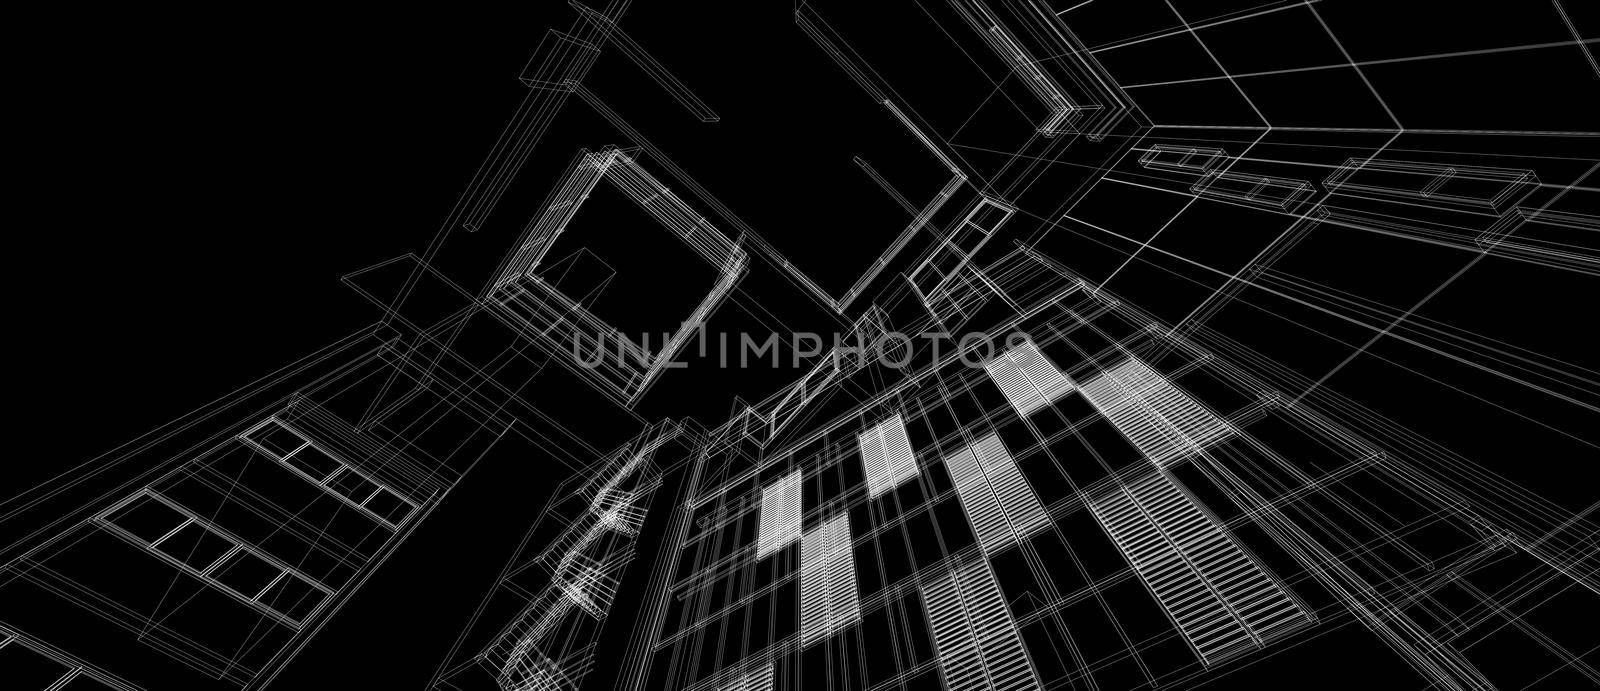 Architecture building space design concept 3d perspective white wire frame rendering black background. For abstract background or wallpaper desktops computer technology design architectural theme.